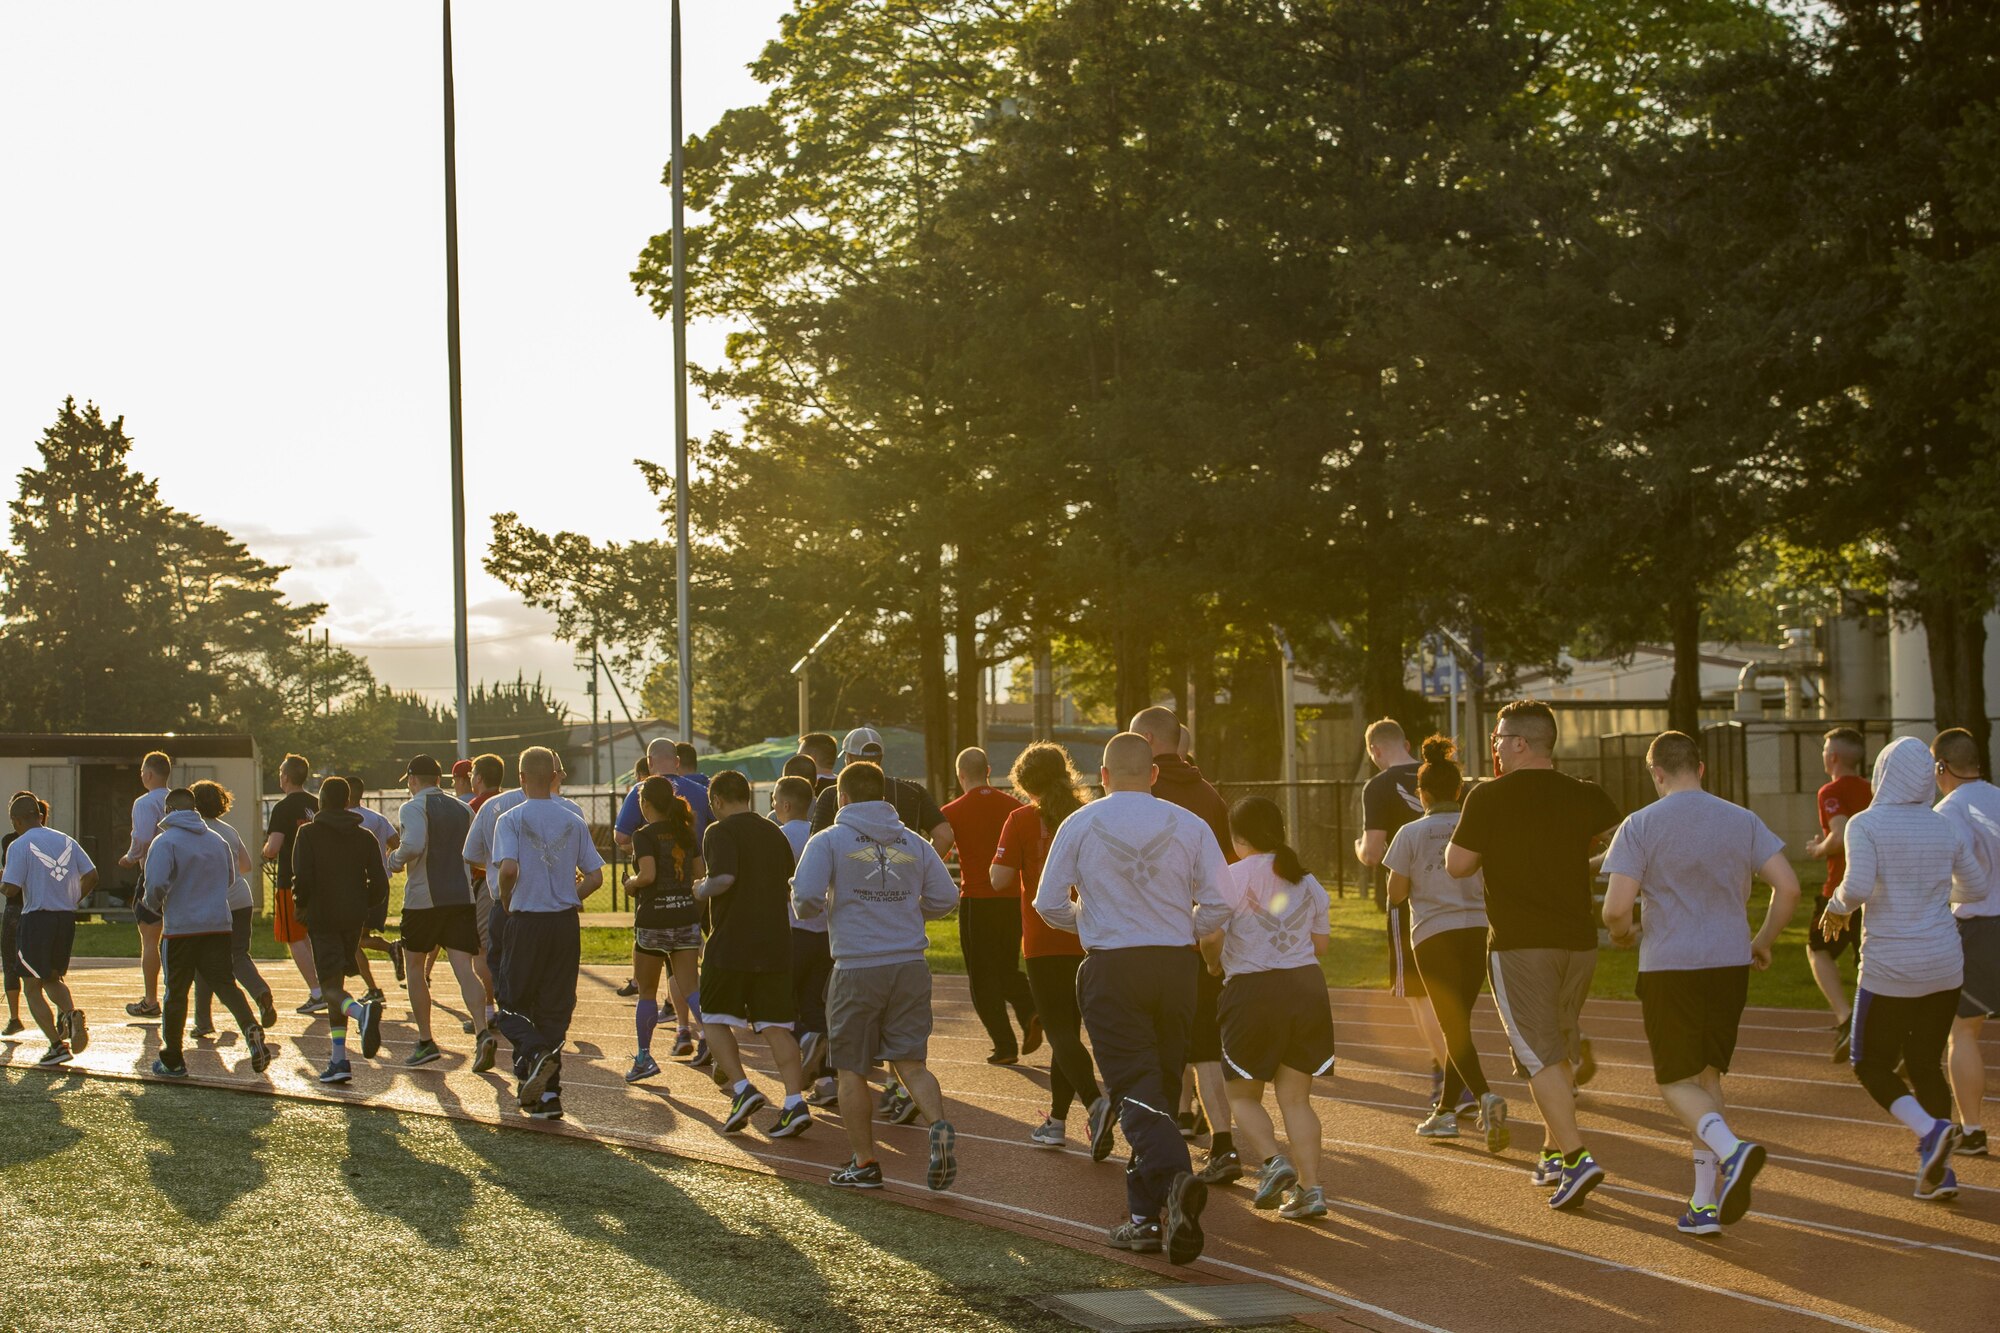 Warrior Run fitness program participants run as a group April 28, 2017, at Yokota Air Base, Japan. The Warrior Run is free and is open to anyone, it lasts one hour and is split in two areas of focus: strength and endurance. (U.S. Air Force photo by Airman 1st Class Donald Hudson)